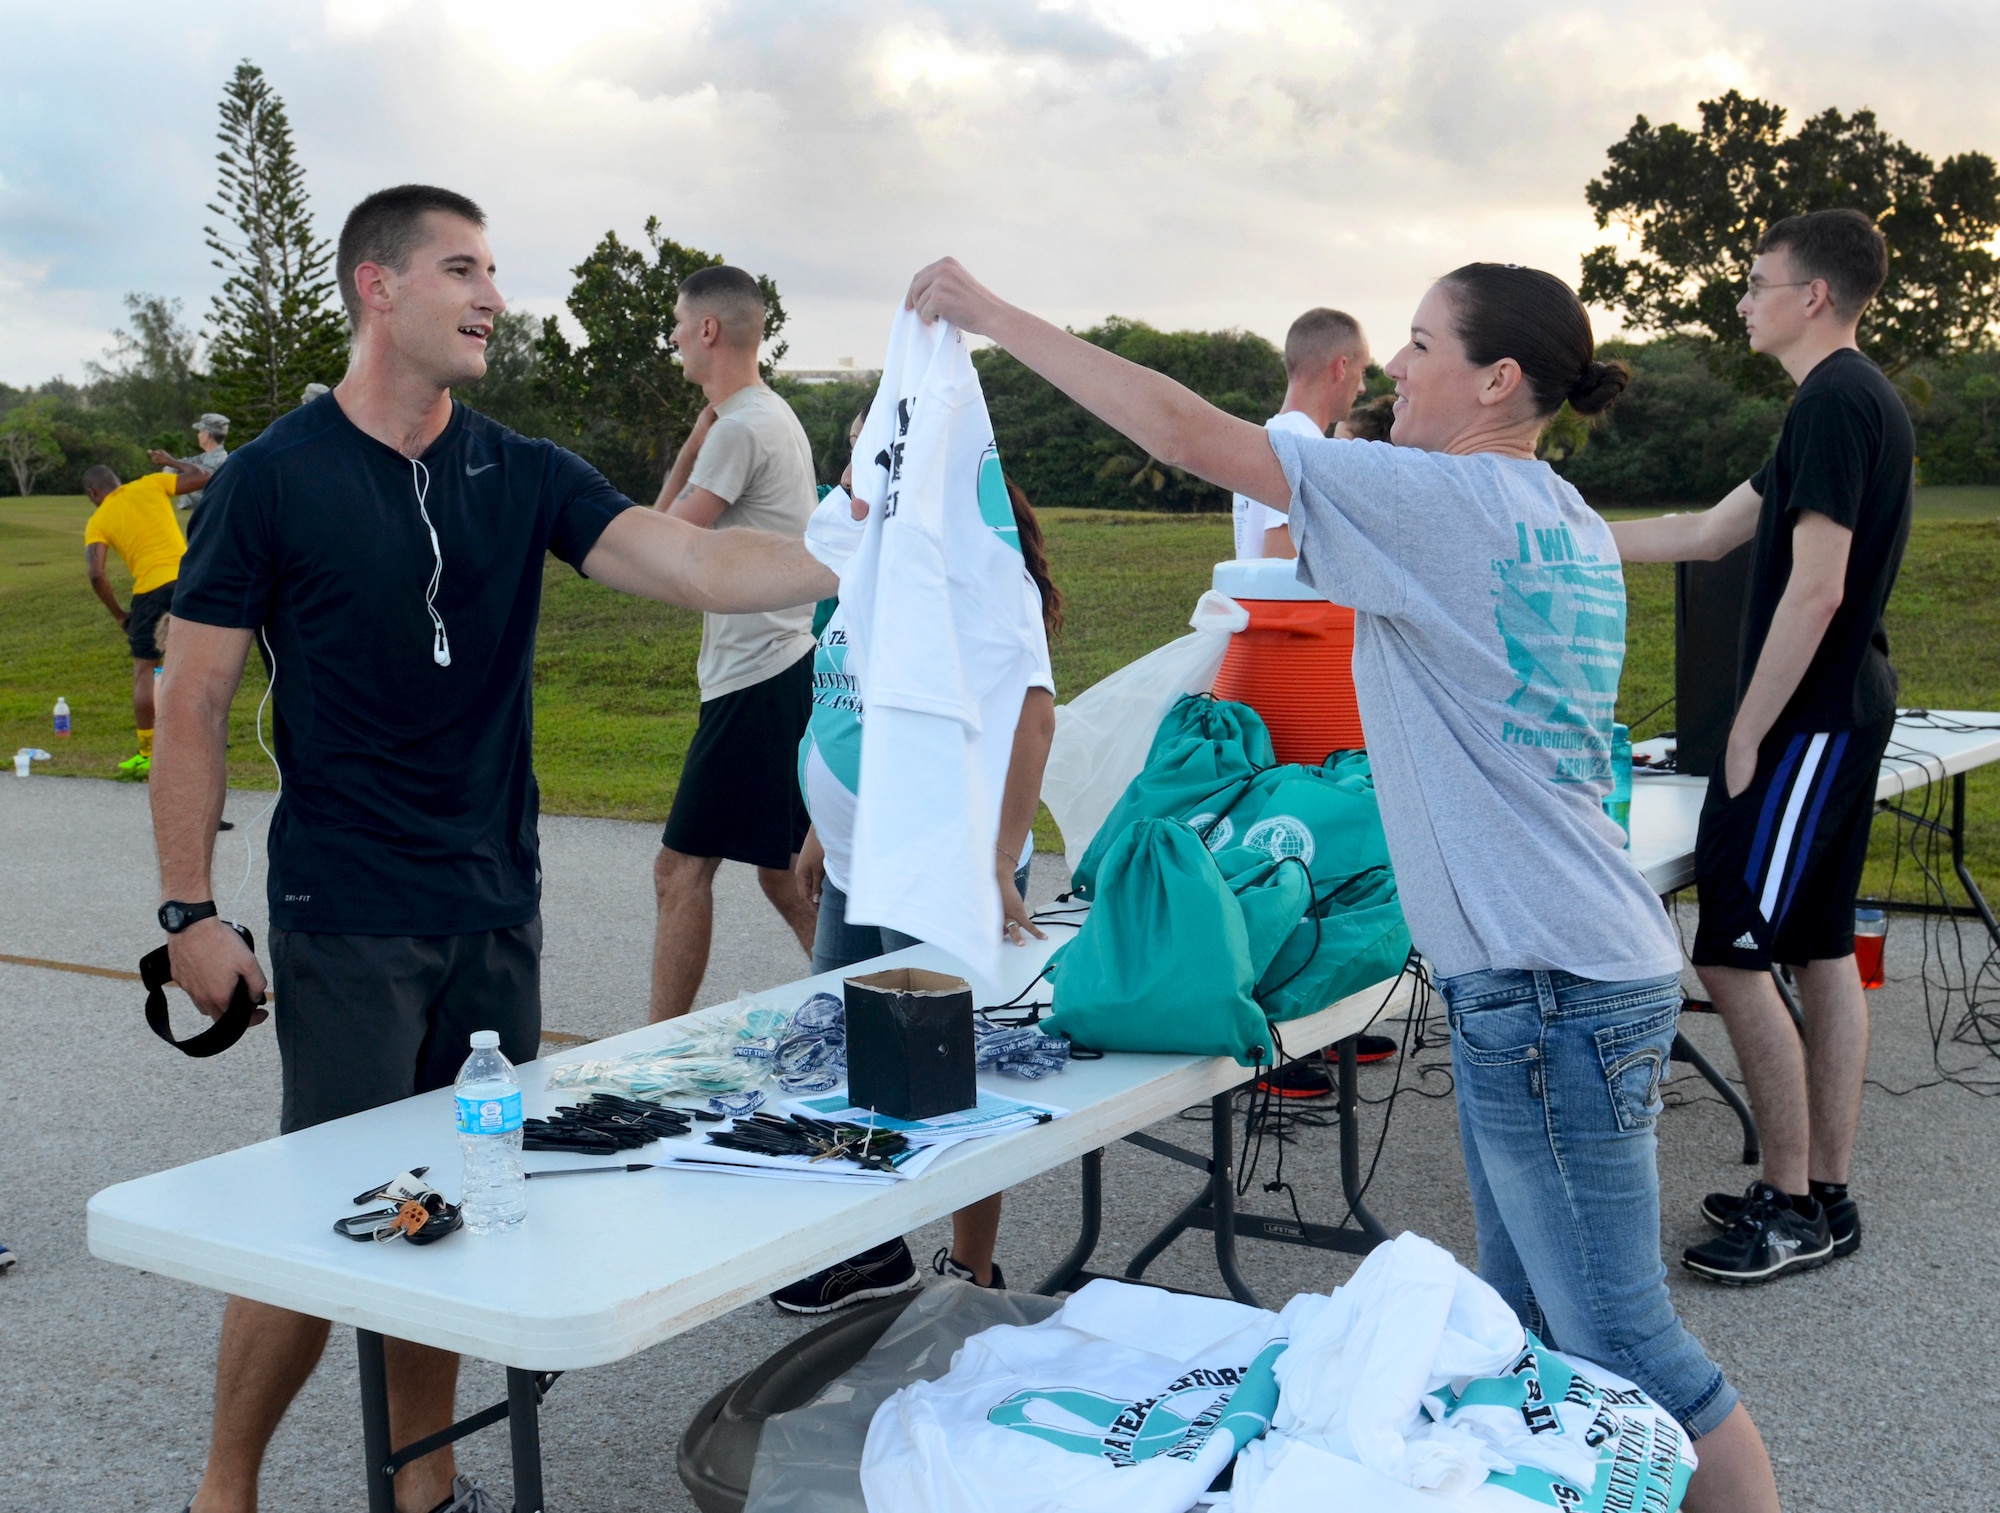 Senior Airman Richard Moore, 36th Combat Communications Squadron client systems journeyman, receives a t-shirt from Senior Airman Jaclyn Scott, 36th Wing Sexual Assault Prevention and Response victim advocate after finishing among the top 50 runners during the Sexual Assault Awareness Month 5K on Andersen Air Force Base, Guam, April 3, 2013. Several units, to include civilians and spouses, joined together to participate in the run to raise awareness in the fight against sexual assault. (U.S. Air Force photo by Senior Airman Benjamin Wiseman/Released)